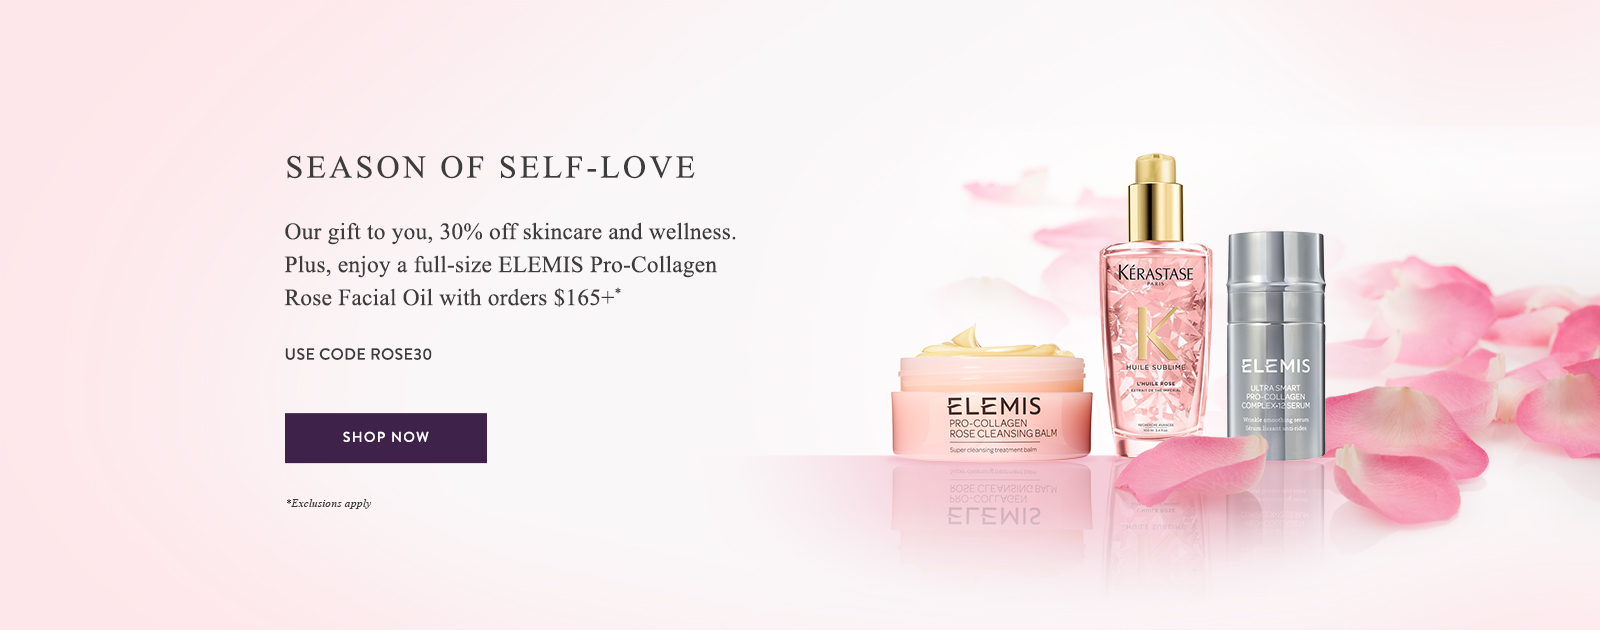 Save 30% Sitewide + Free ELEMIS Gift